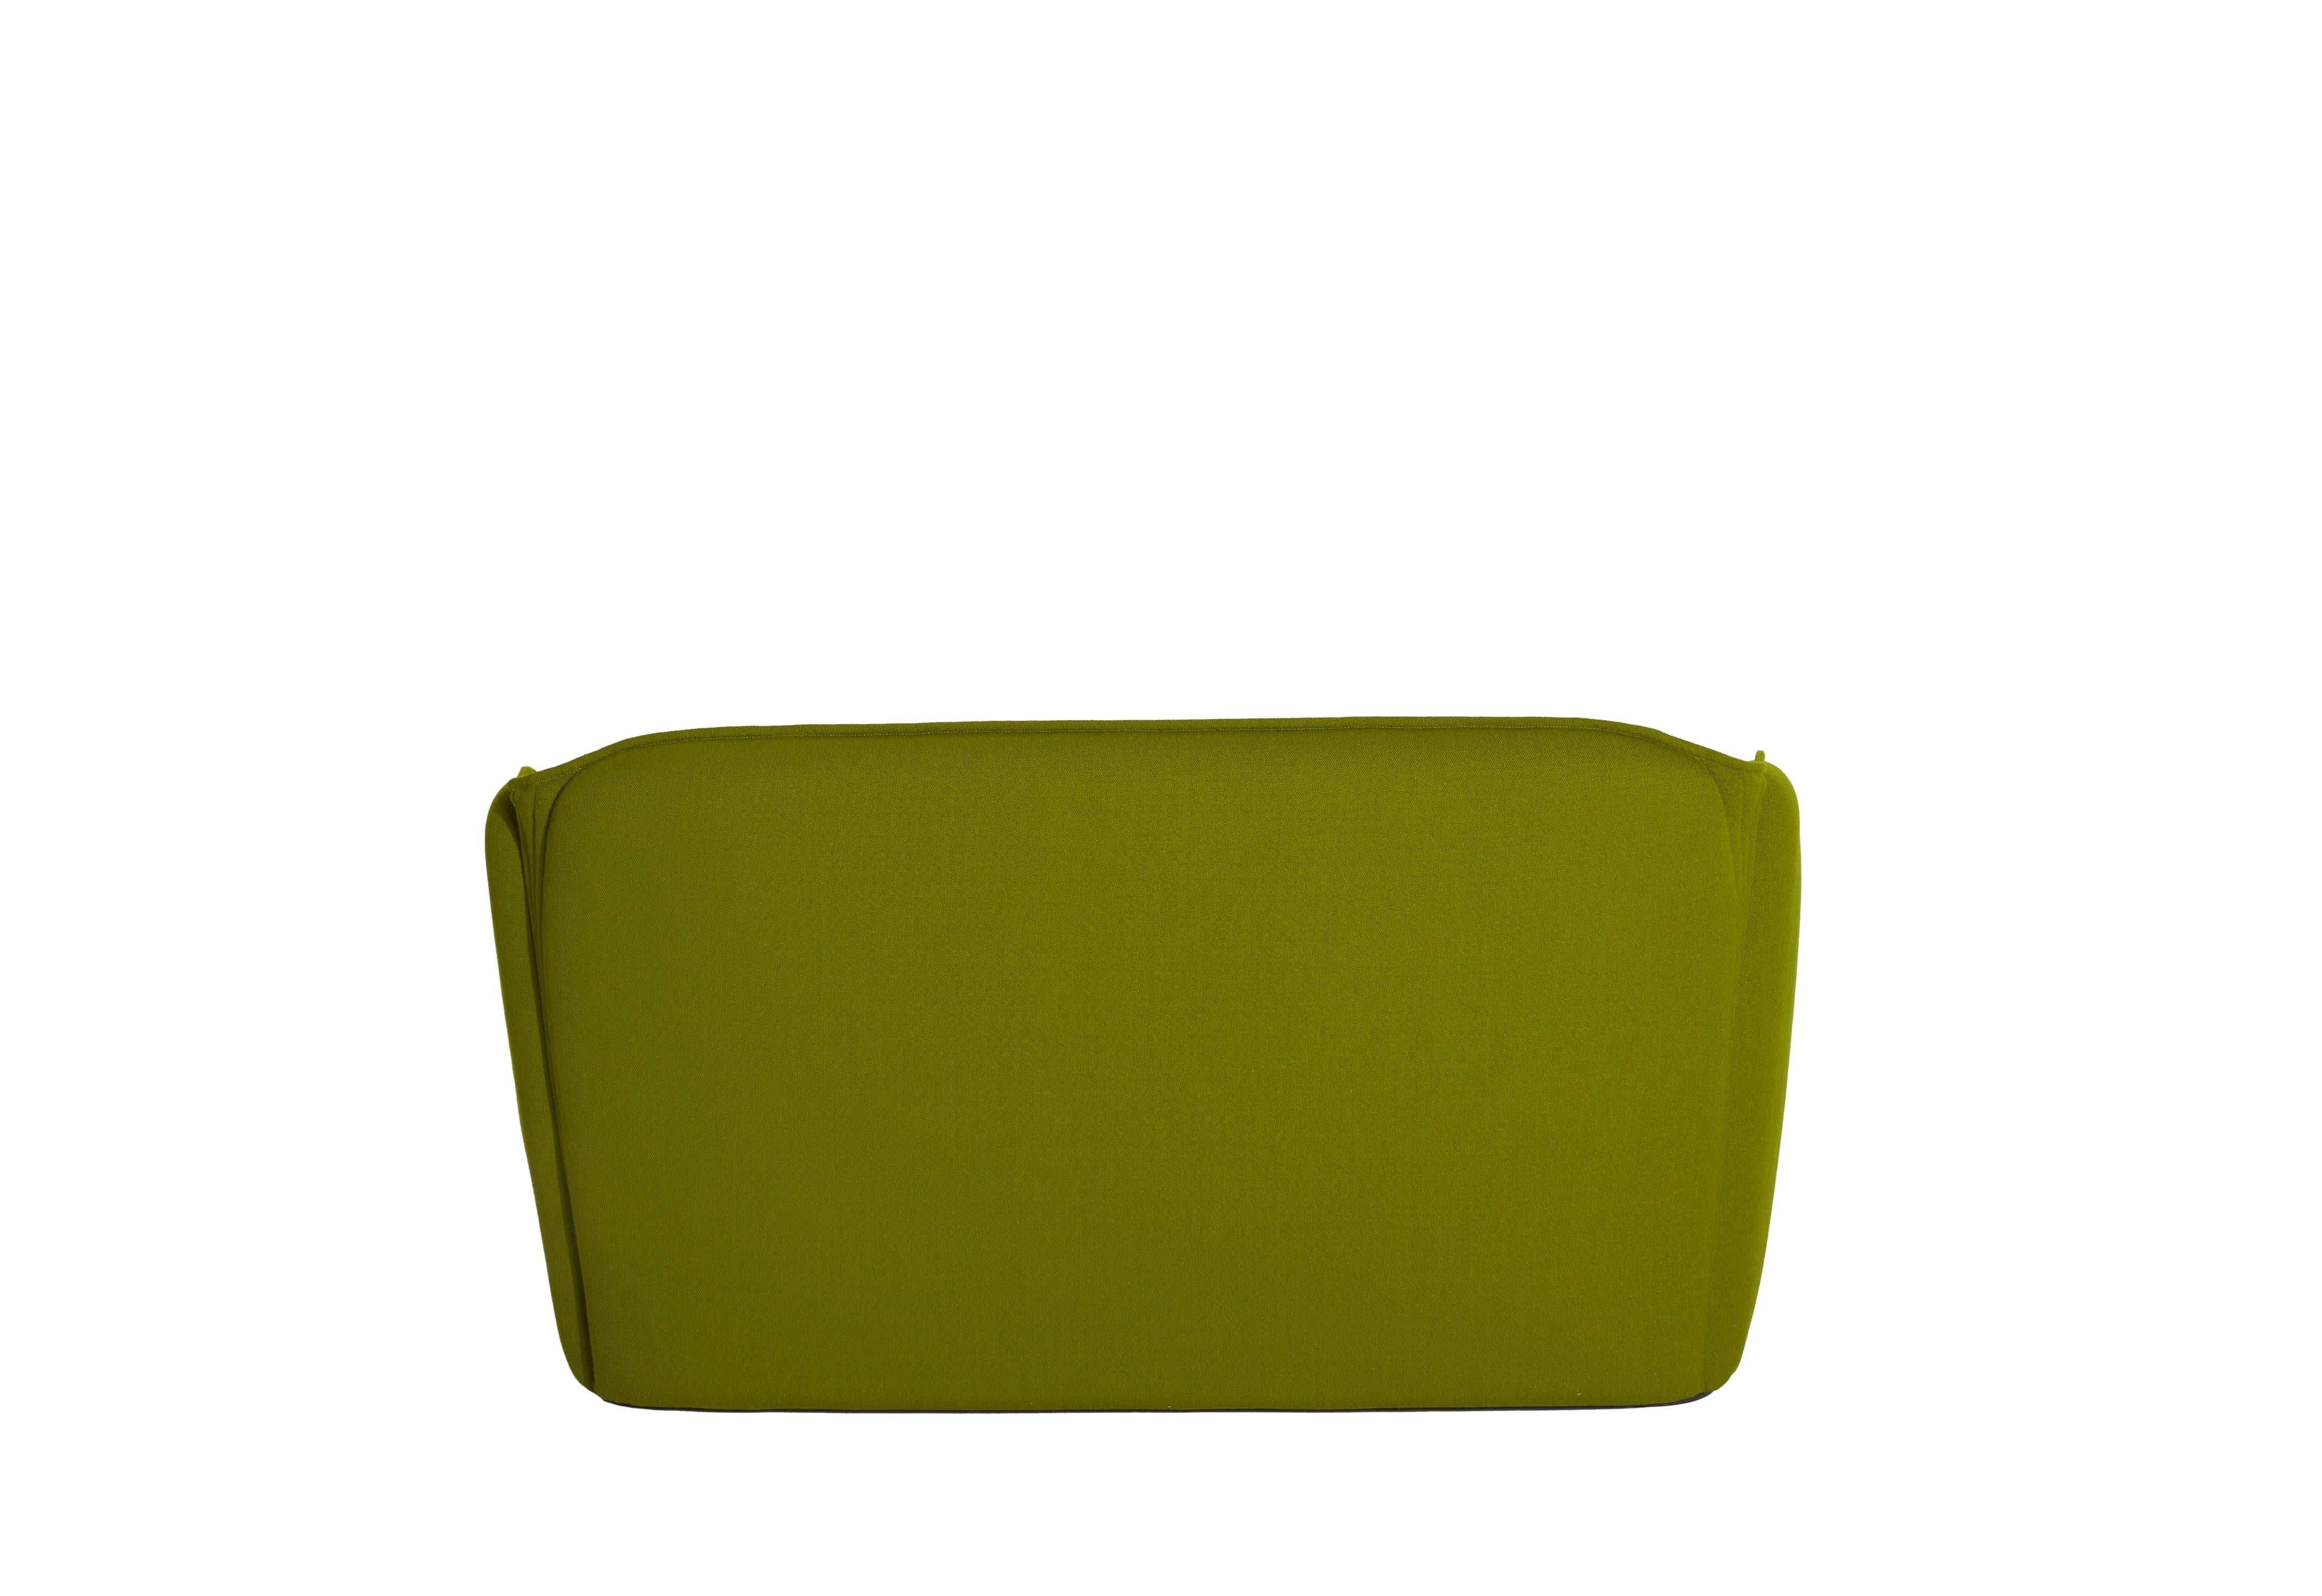 Petite Friture Lily Sofa in Olive Green by Färg & Blanche, 2022 In New Condition For Sale In Brooklyn, NY